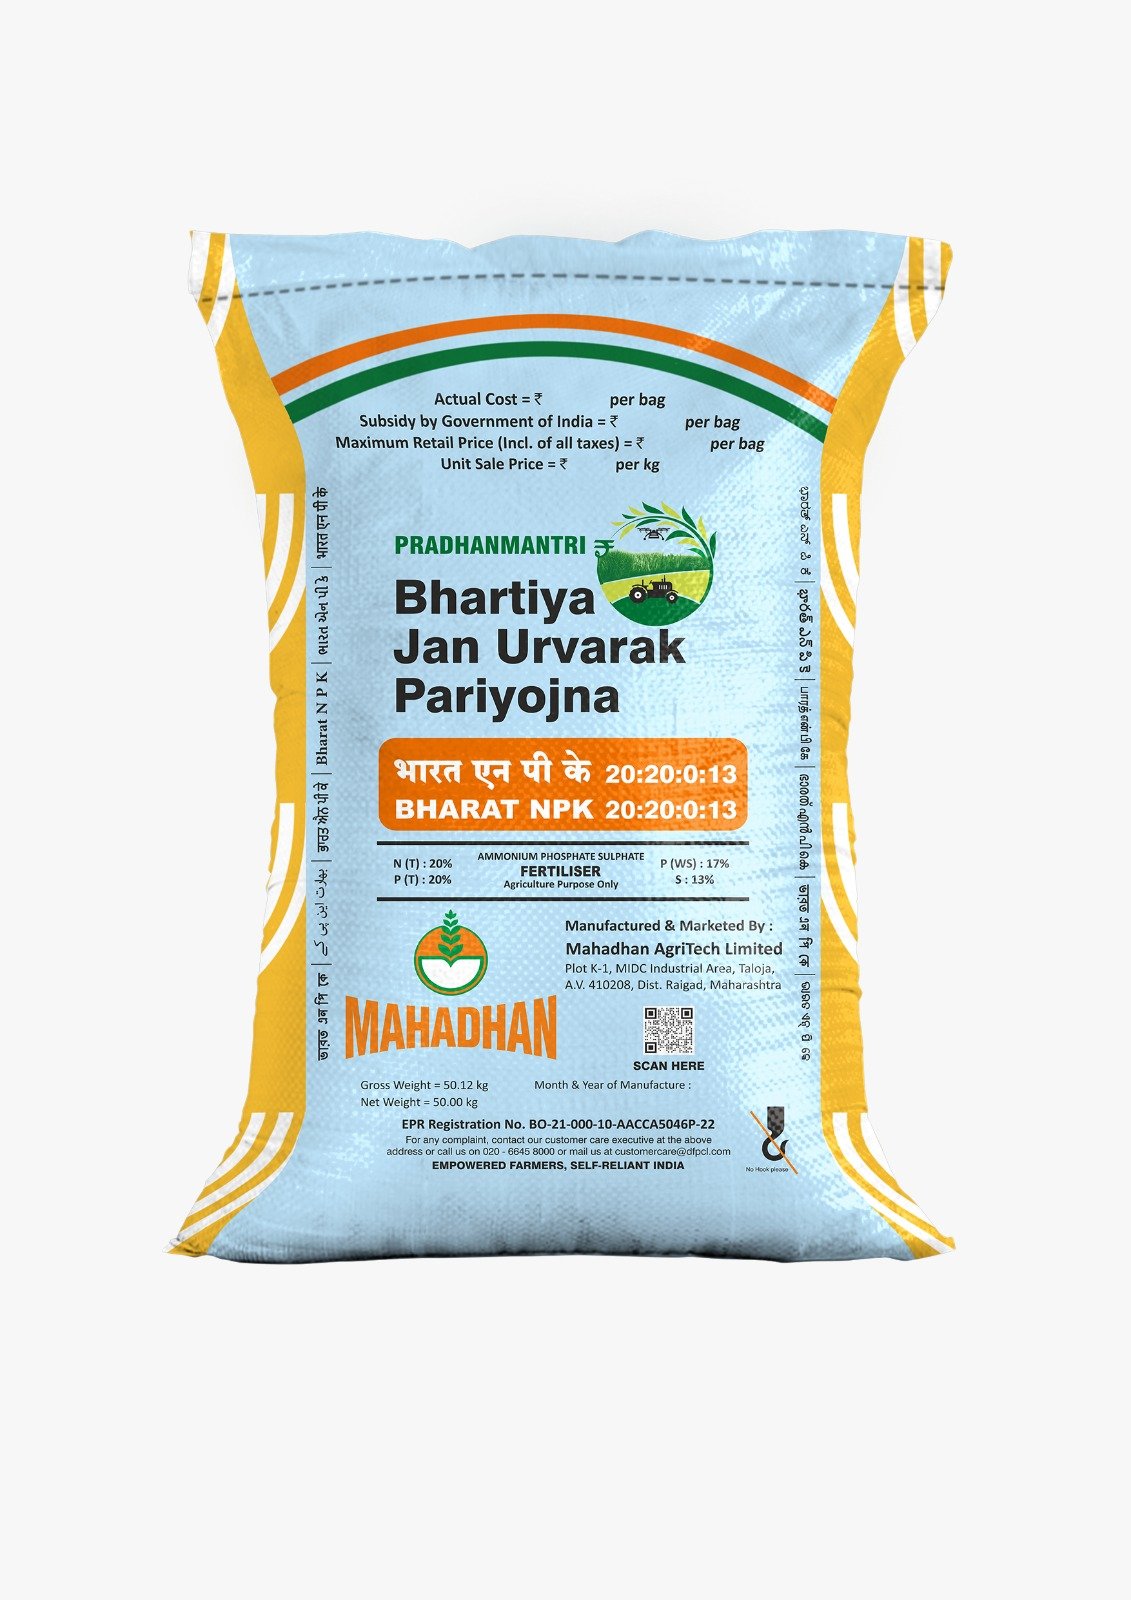 Mahadhan SMARTEK’s technology significantly increase  tillers up to 10 times in Paddy Crop